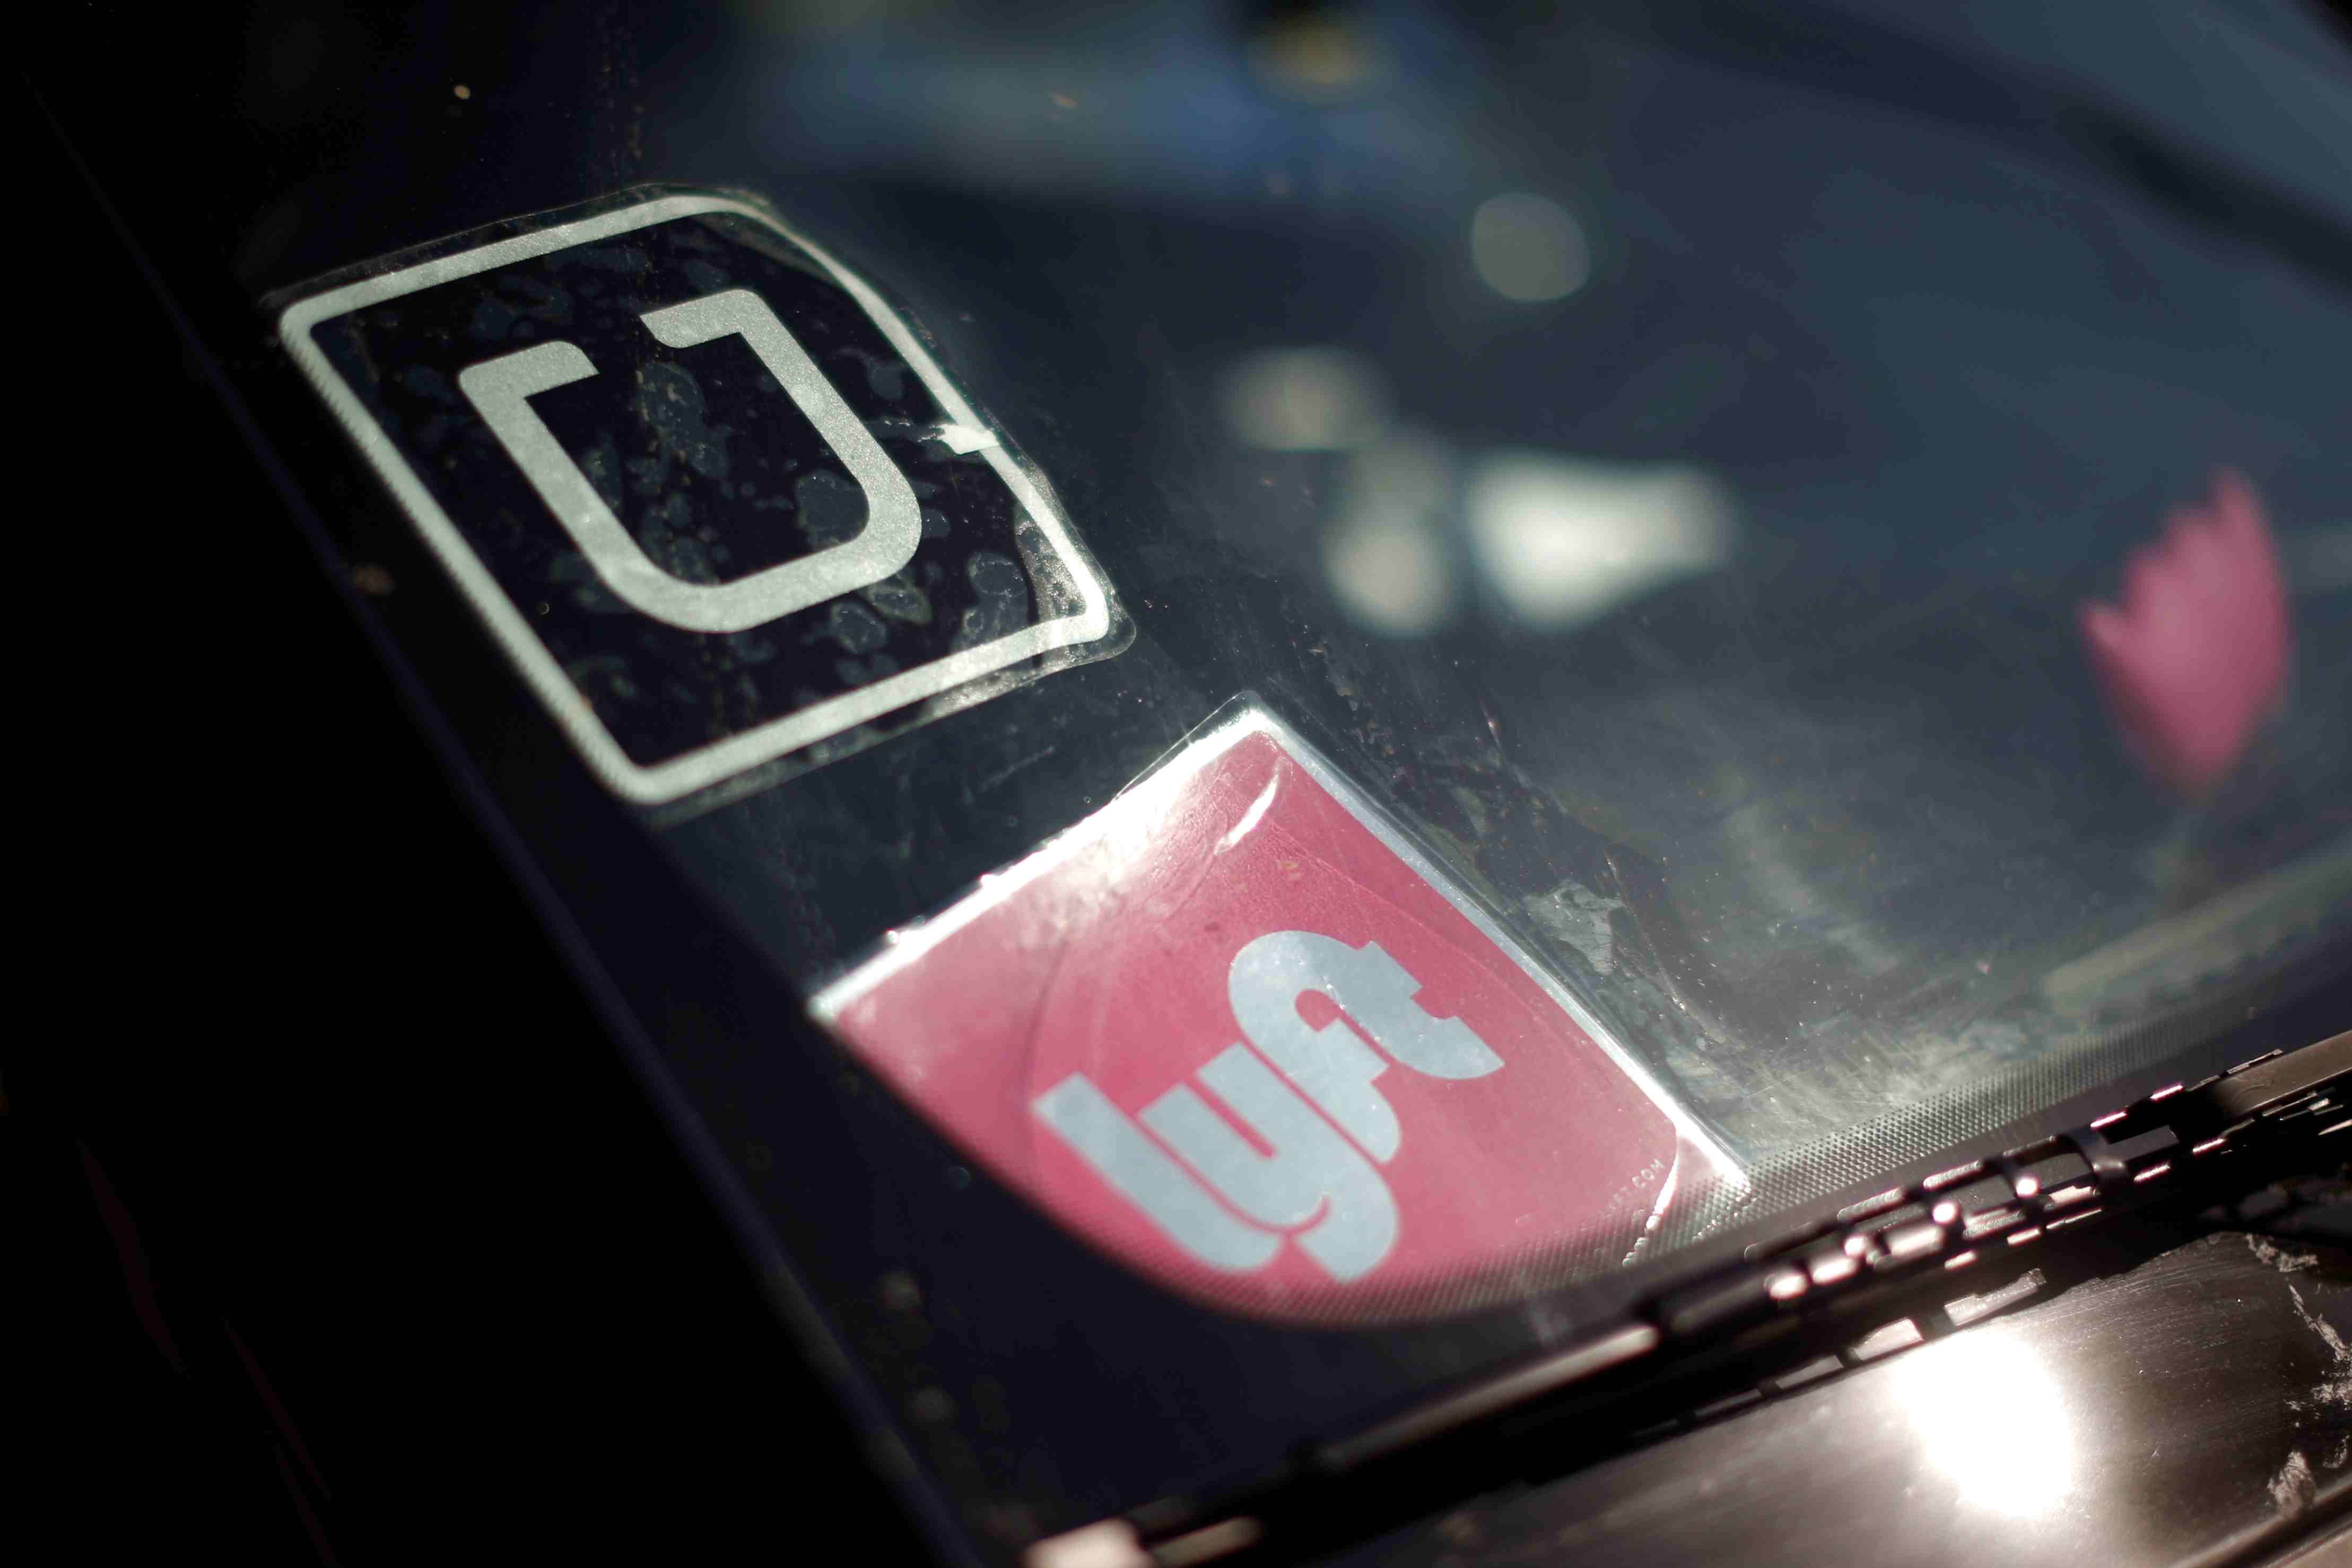 Uber Lyft drivers to face background checks sooner than expected 4434x2956